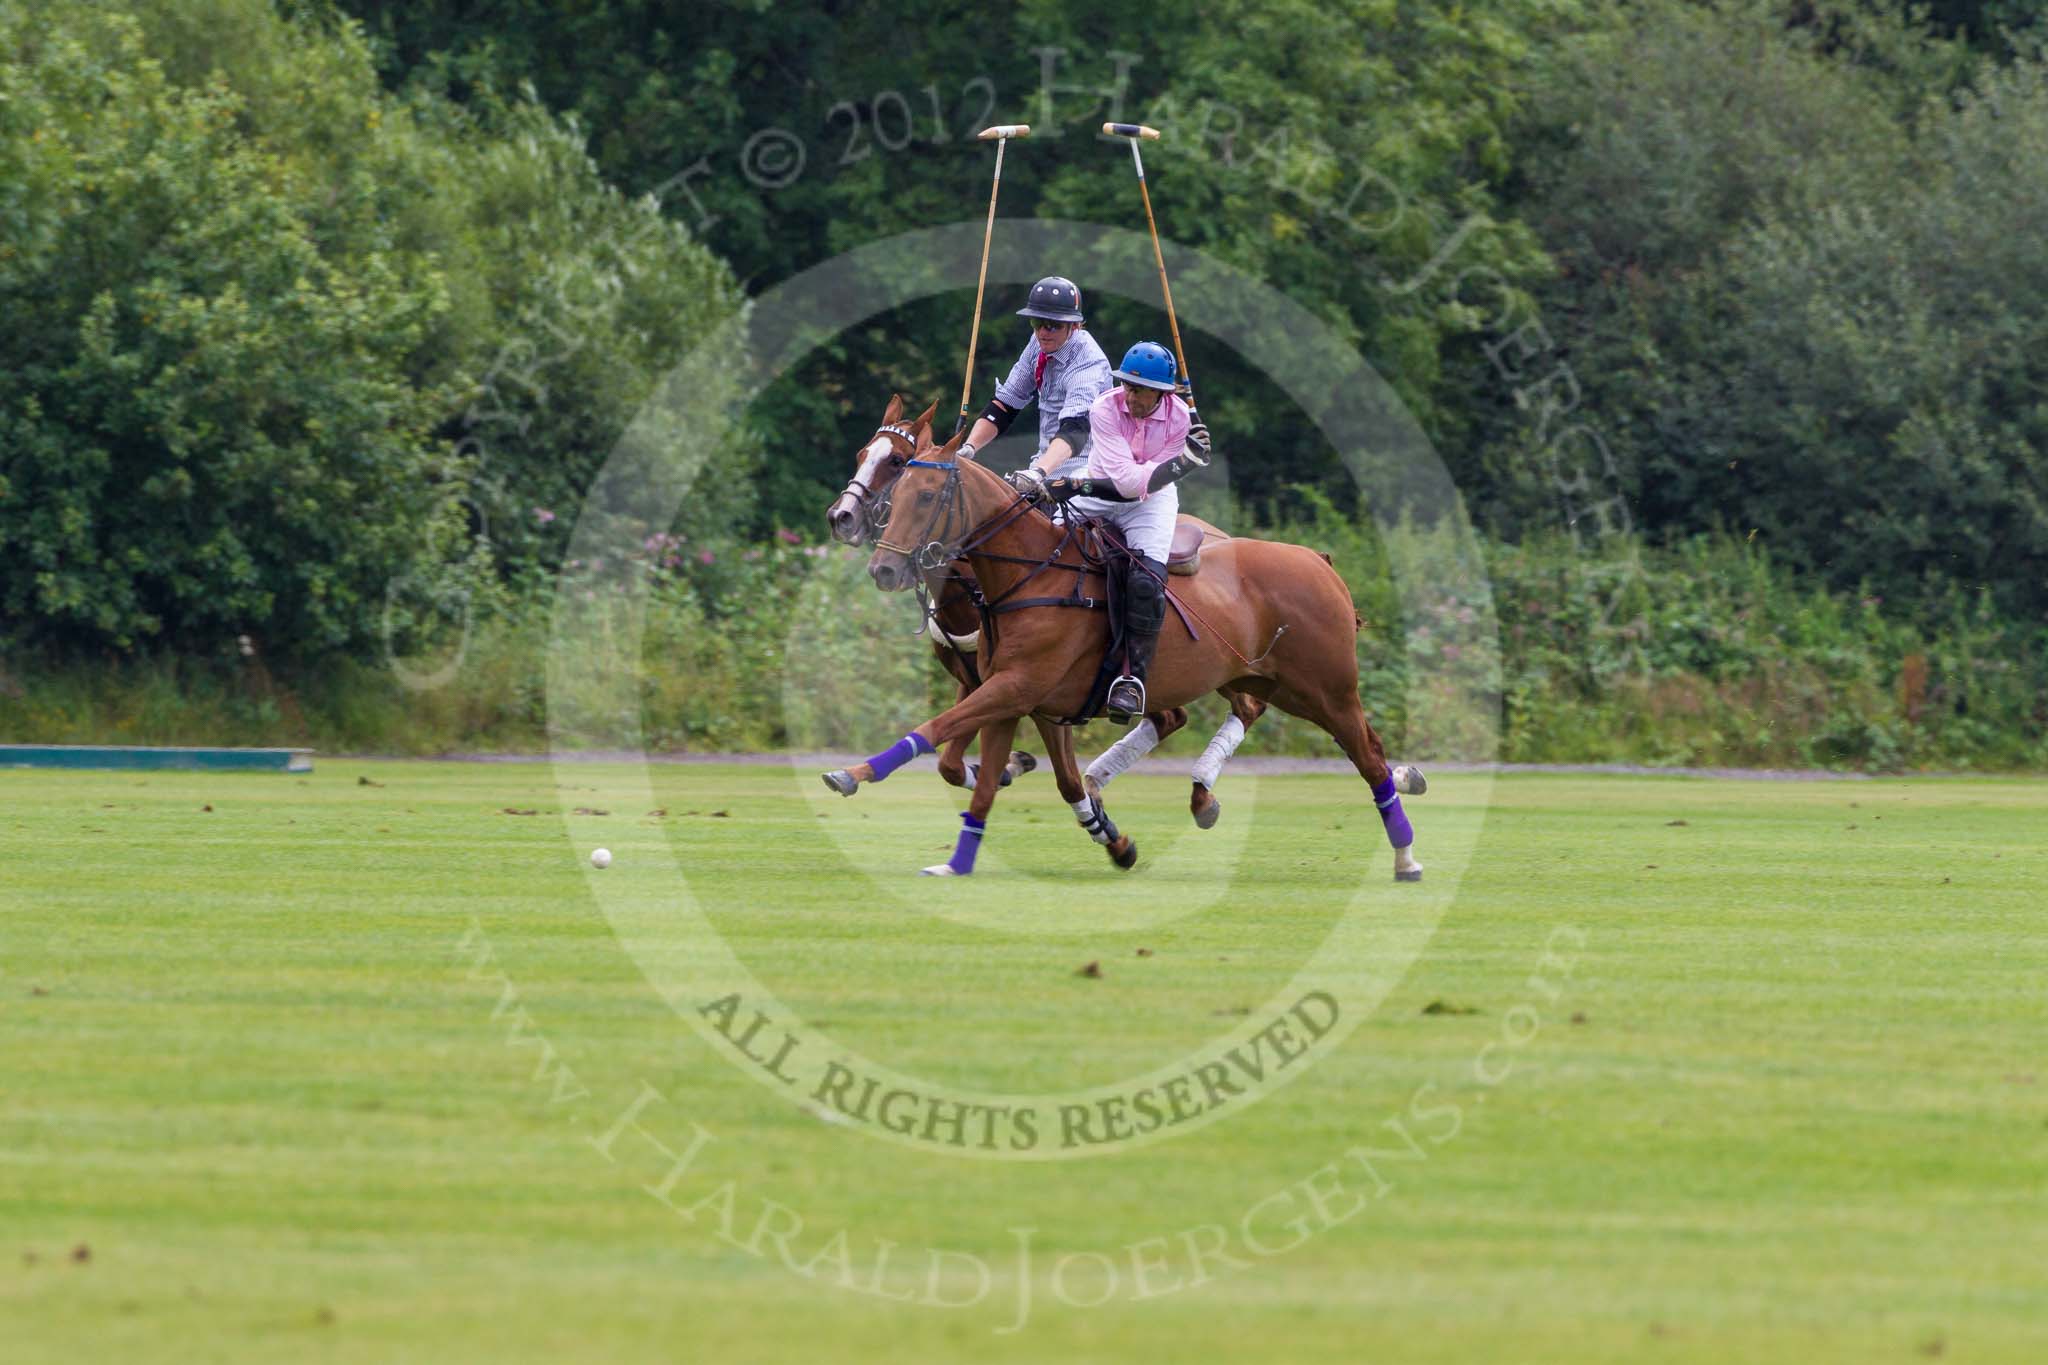 7th Heritage Polo Cup semi-finals: Justo Saveedra, Team Emerging Switzerland, v Henry Fisherr, Team Silver Fox USA..
Hurtwood Park Polo Club,
Ewhurst Green,
Surrey,
United Kingdom,
on 04 August 2012 at 11:33, image #52